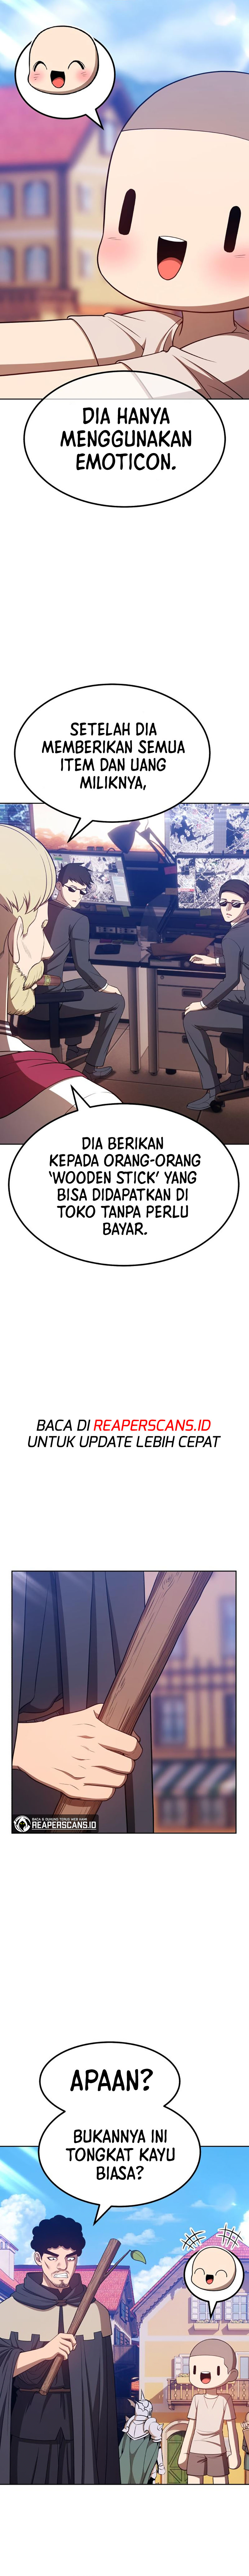 +99 Wooden Stick Chapter 35 13